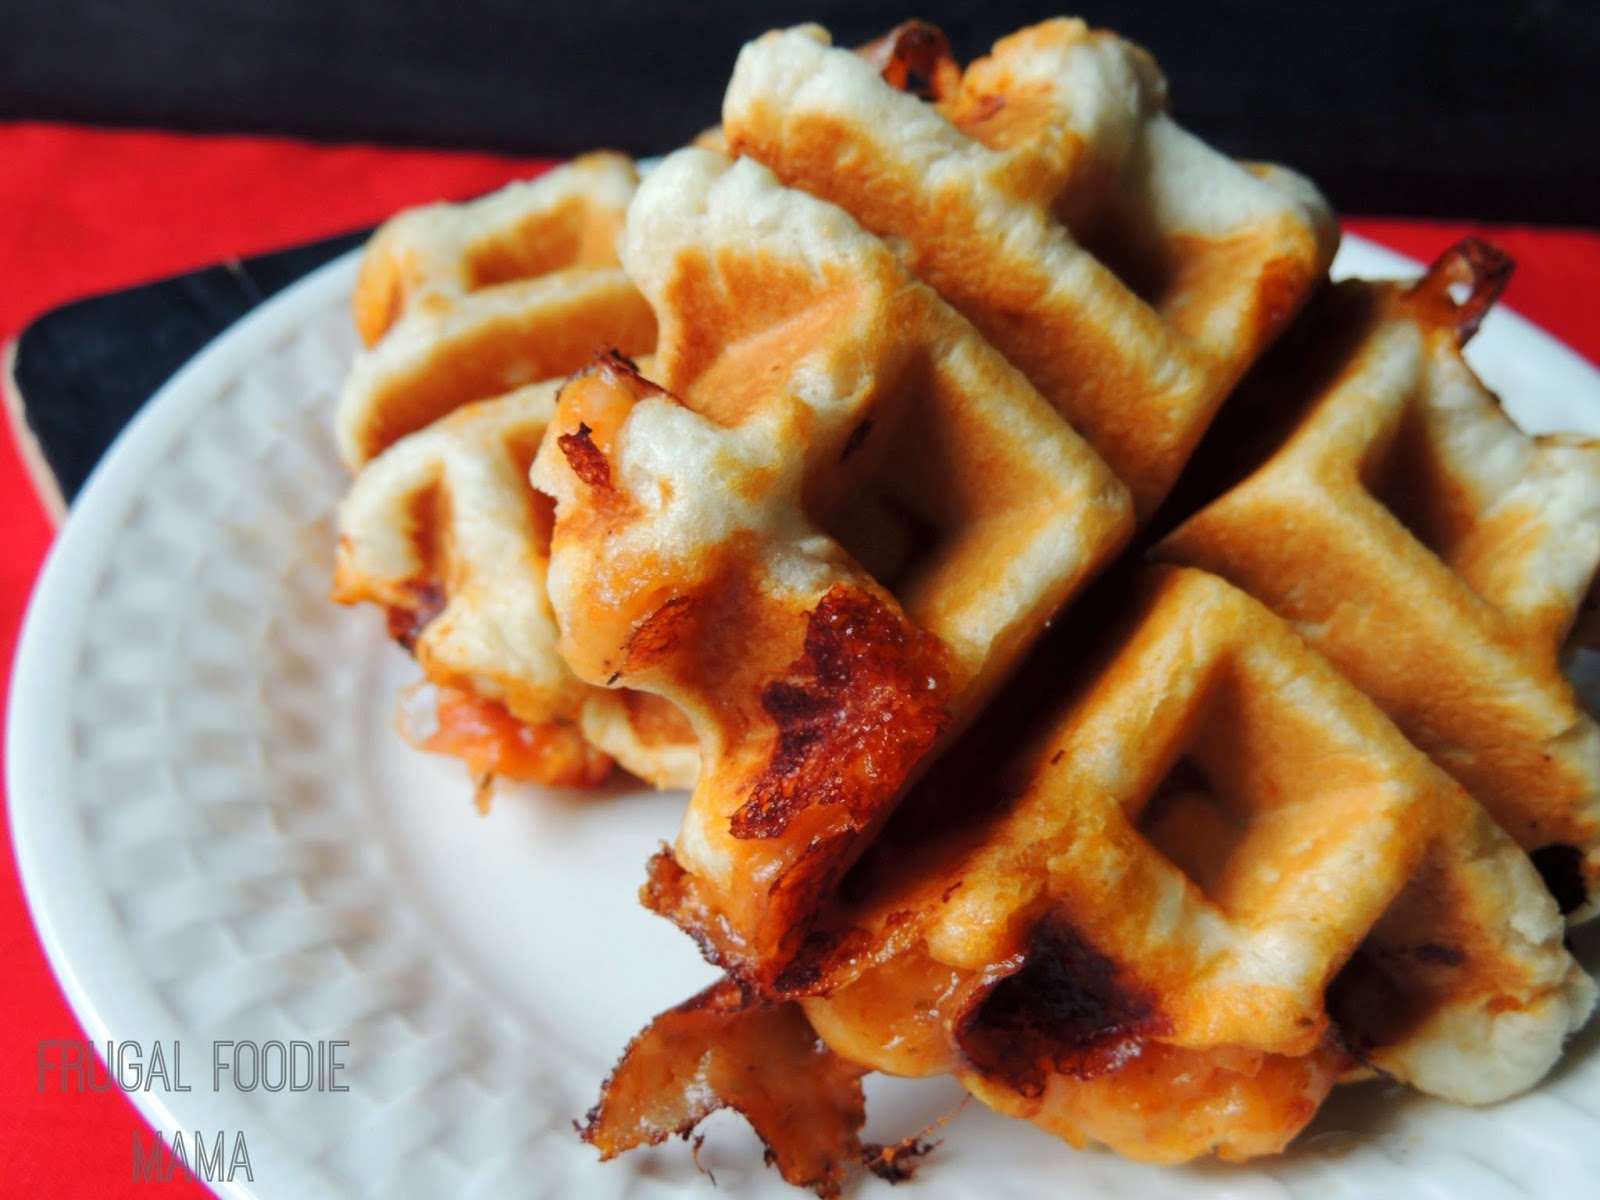 These Pepperoni Pizza Waffle Pockets are simple to make, ready in minutes, and will be gobbled up by everyone in your family.